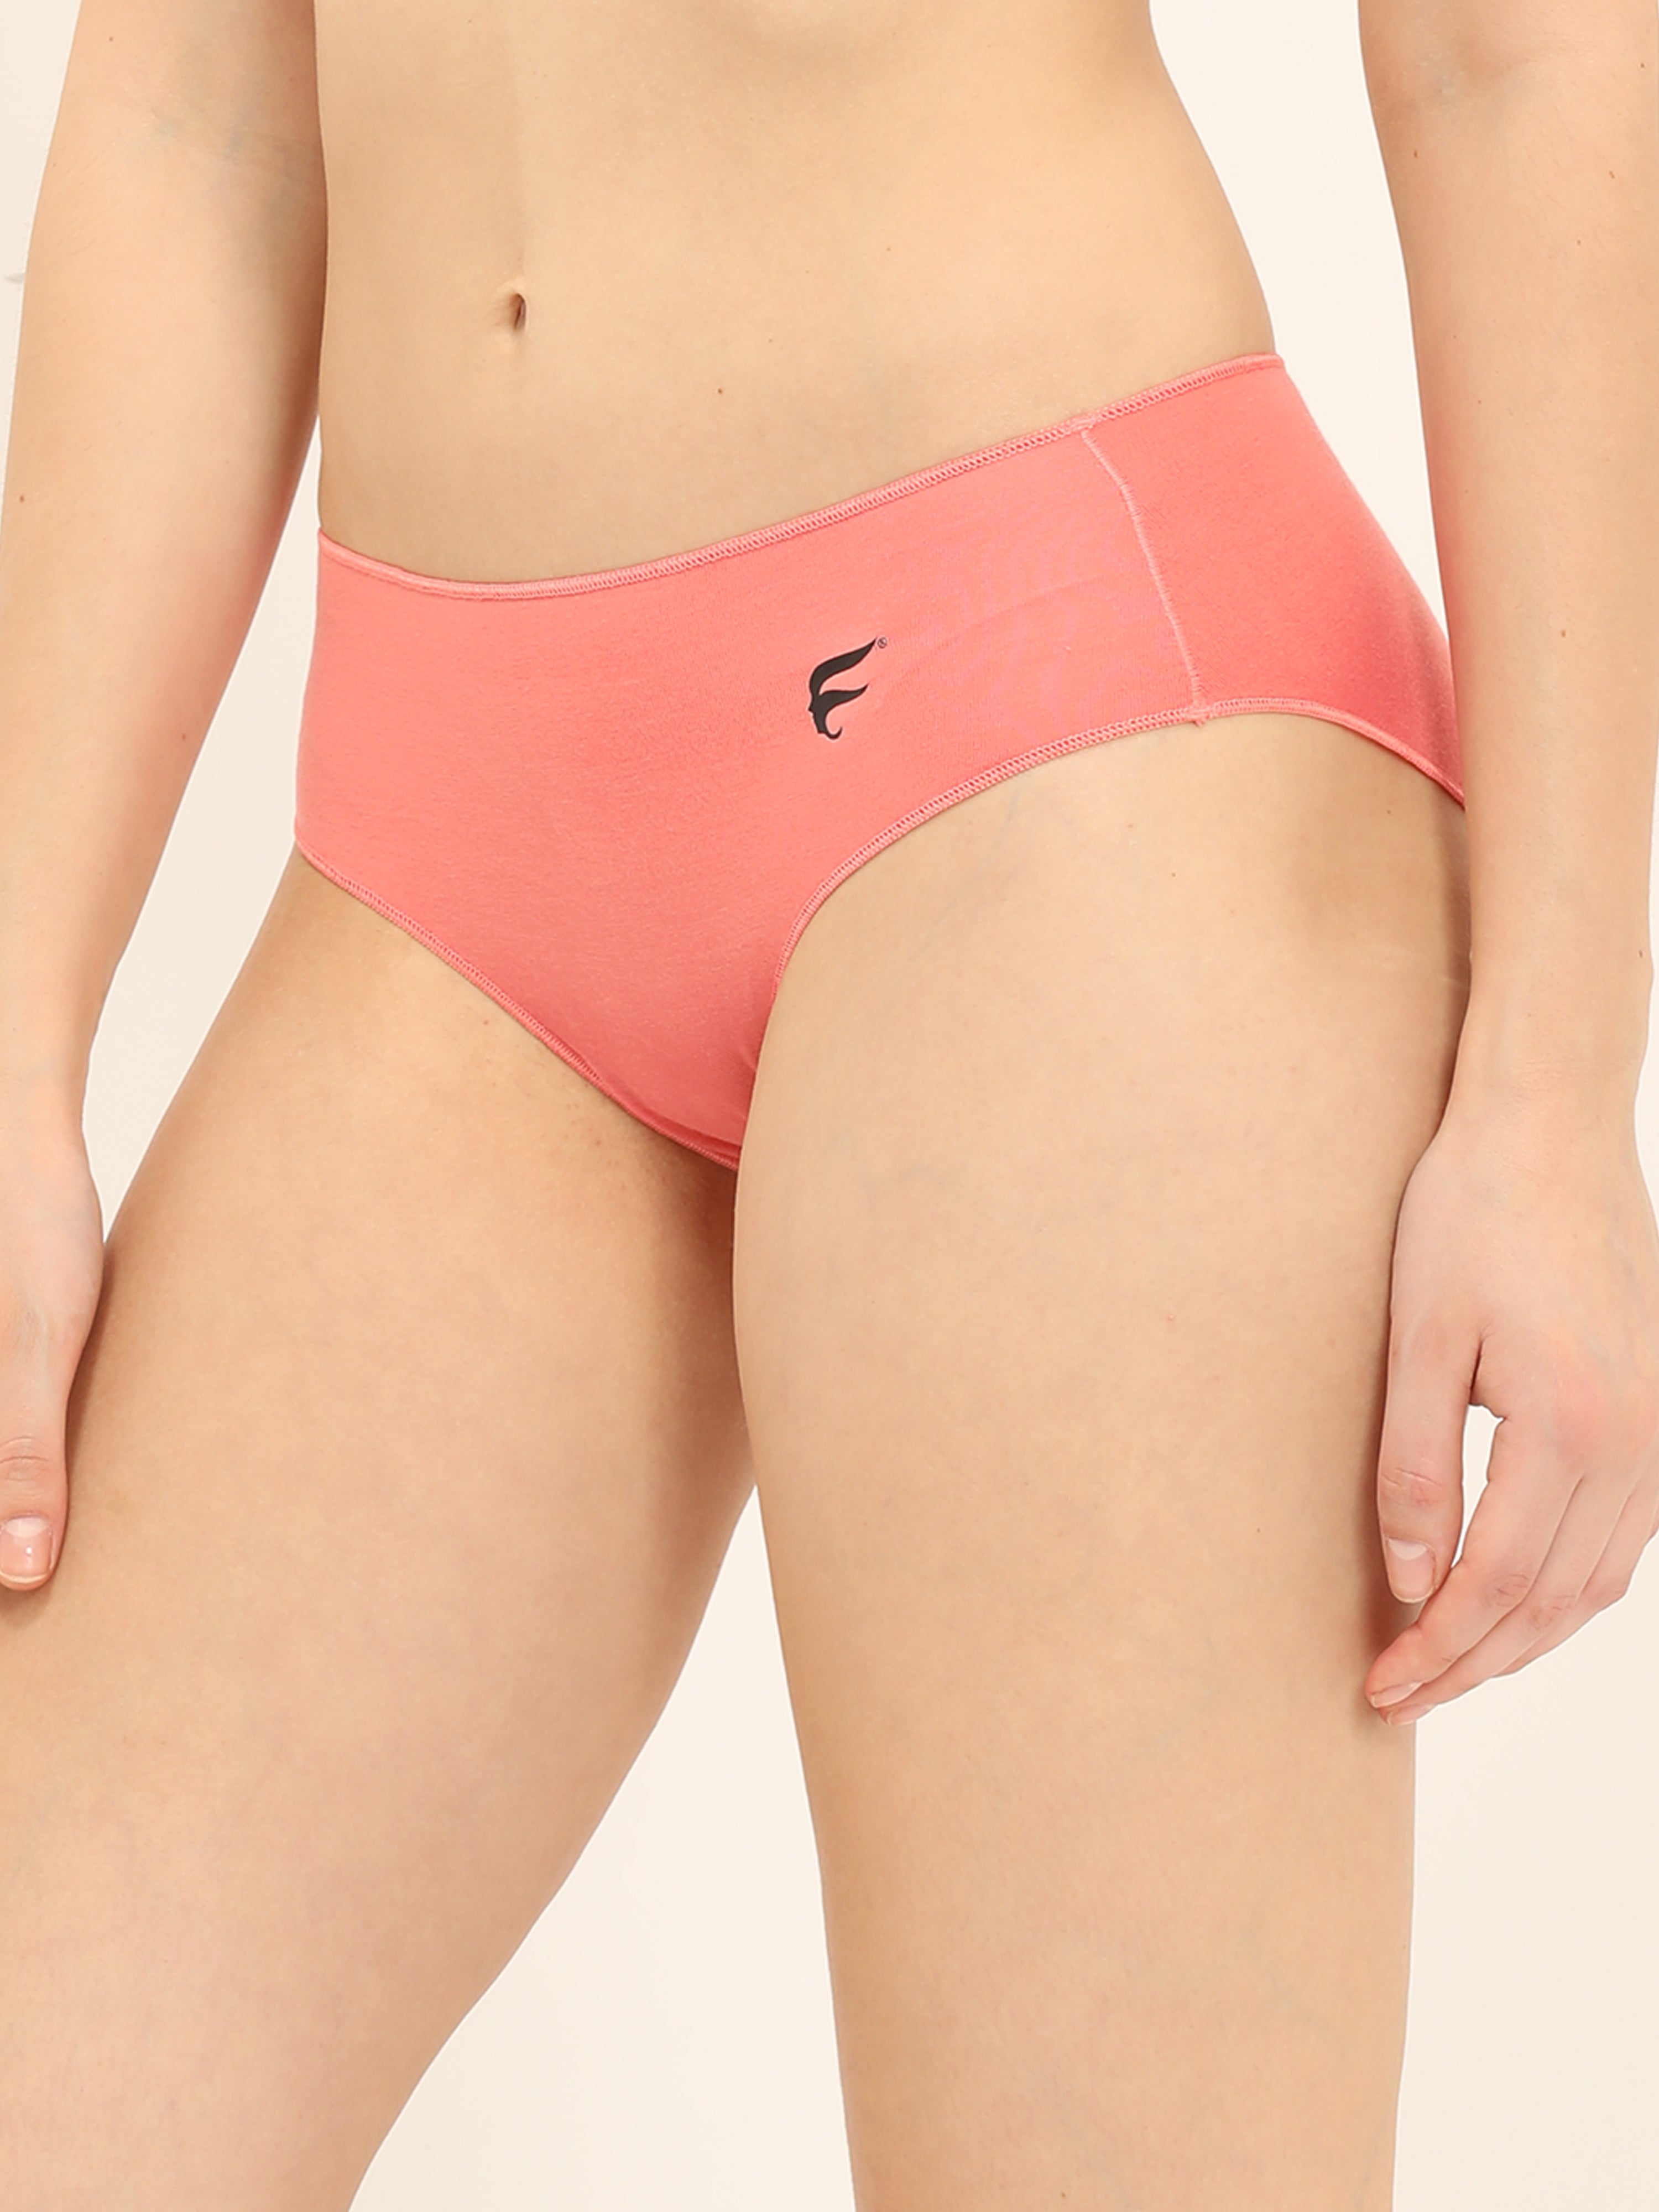 Envie Hipster, Full coverage panty, Super Soft Modal fabric for soft touch comfort Pack of 3